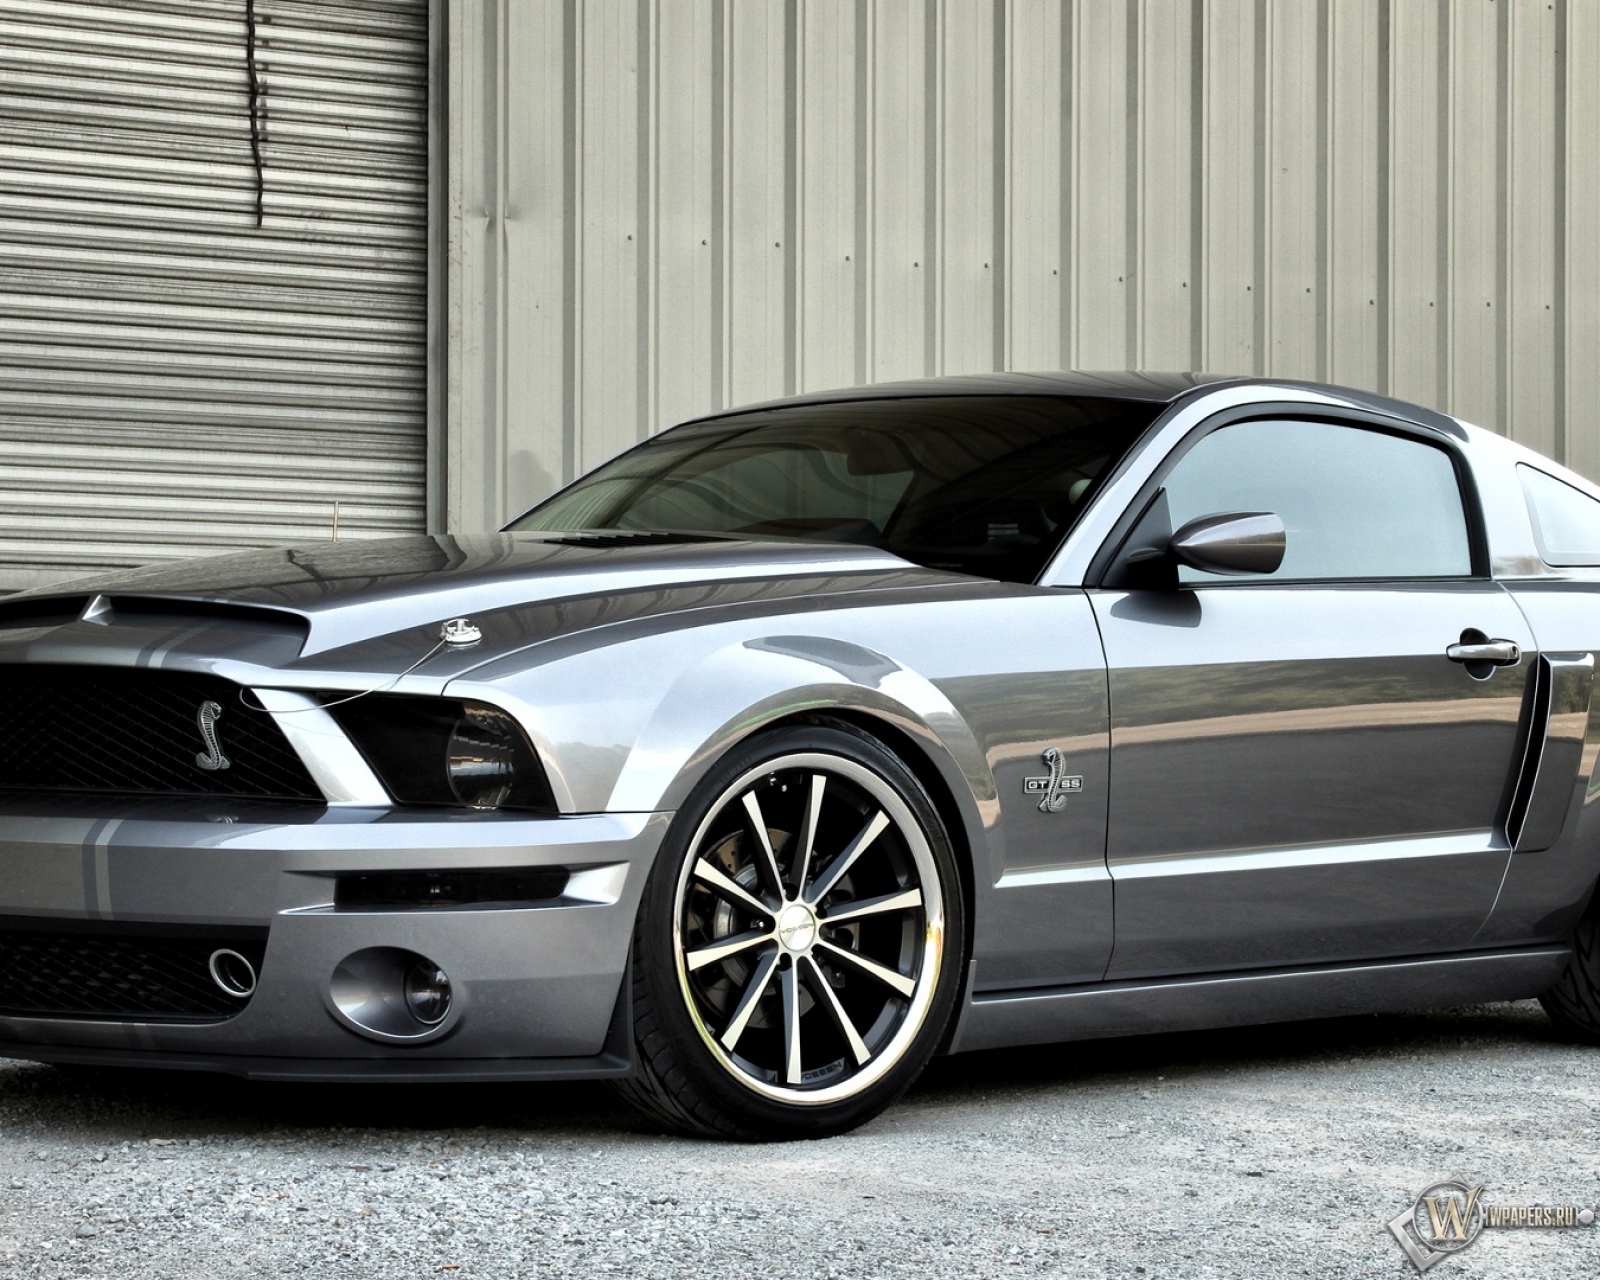 Ford Mustang Shelby GT500 1600x1280